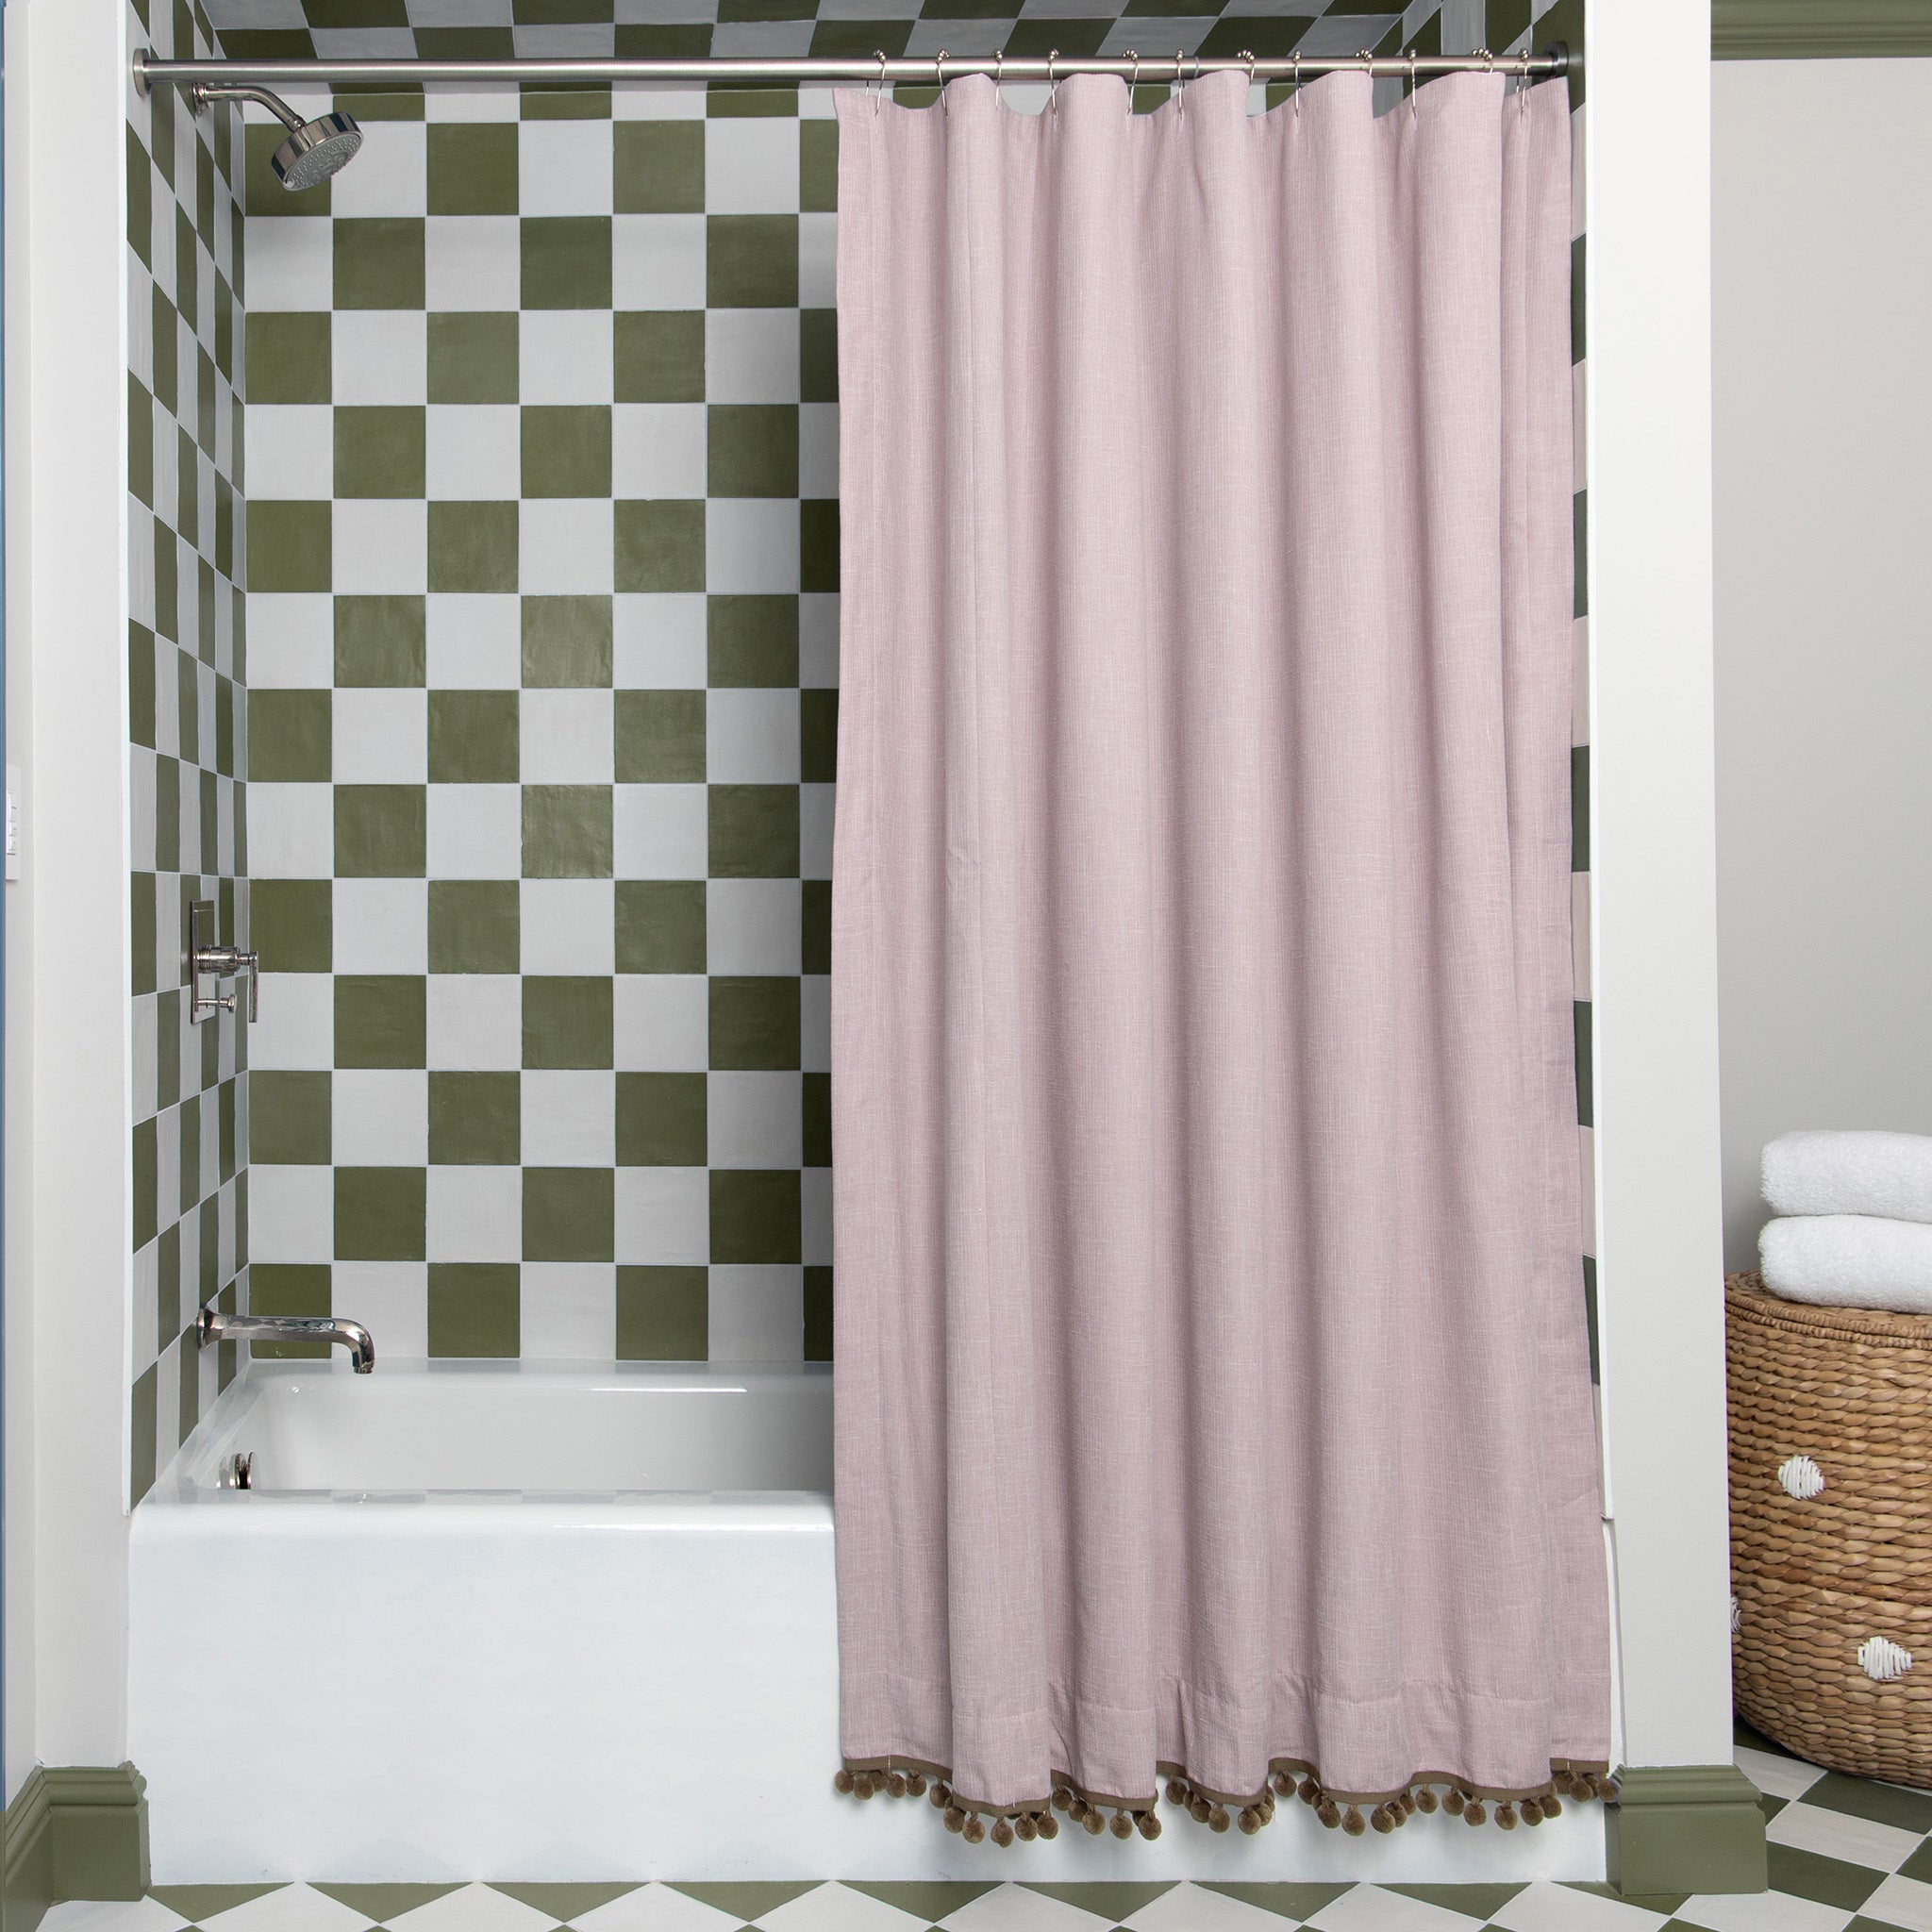 pink shower curtain hanging in front of a bathtub with green and white tiles